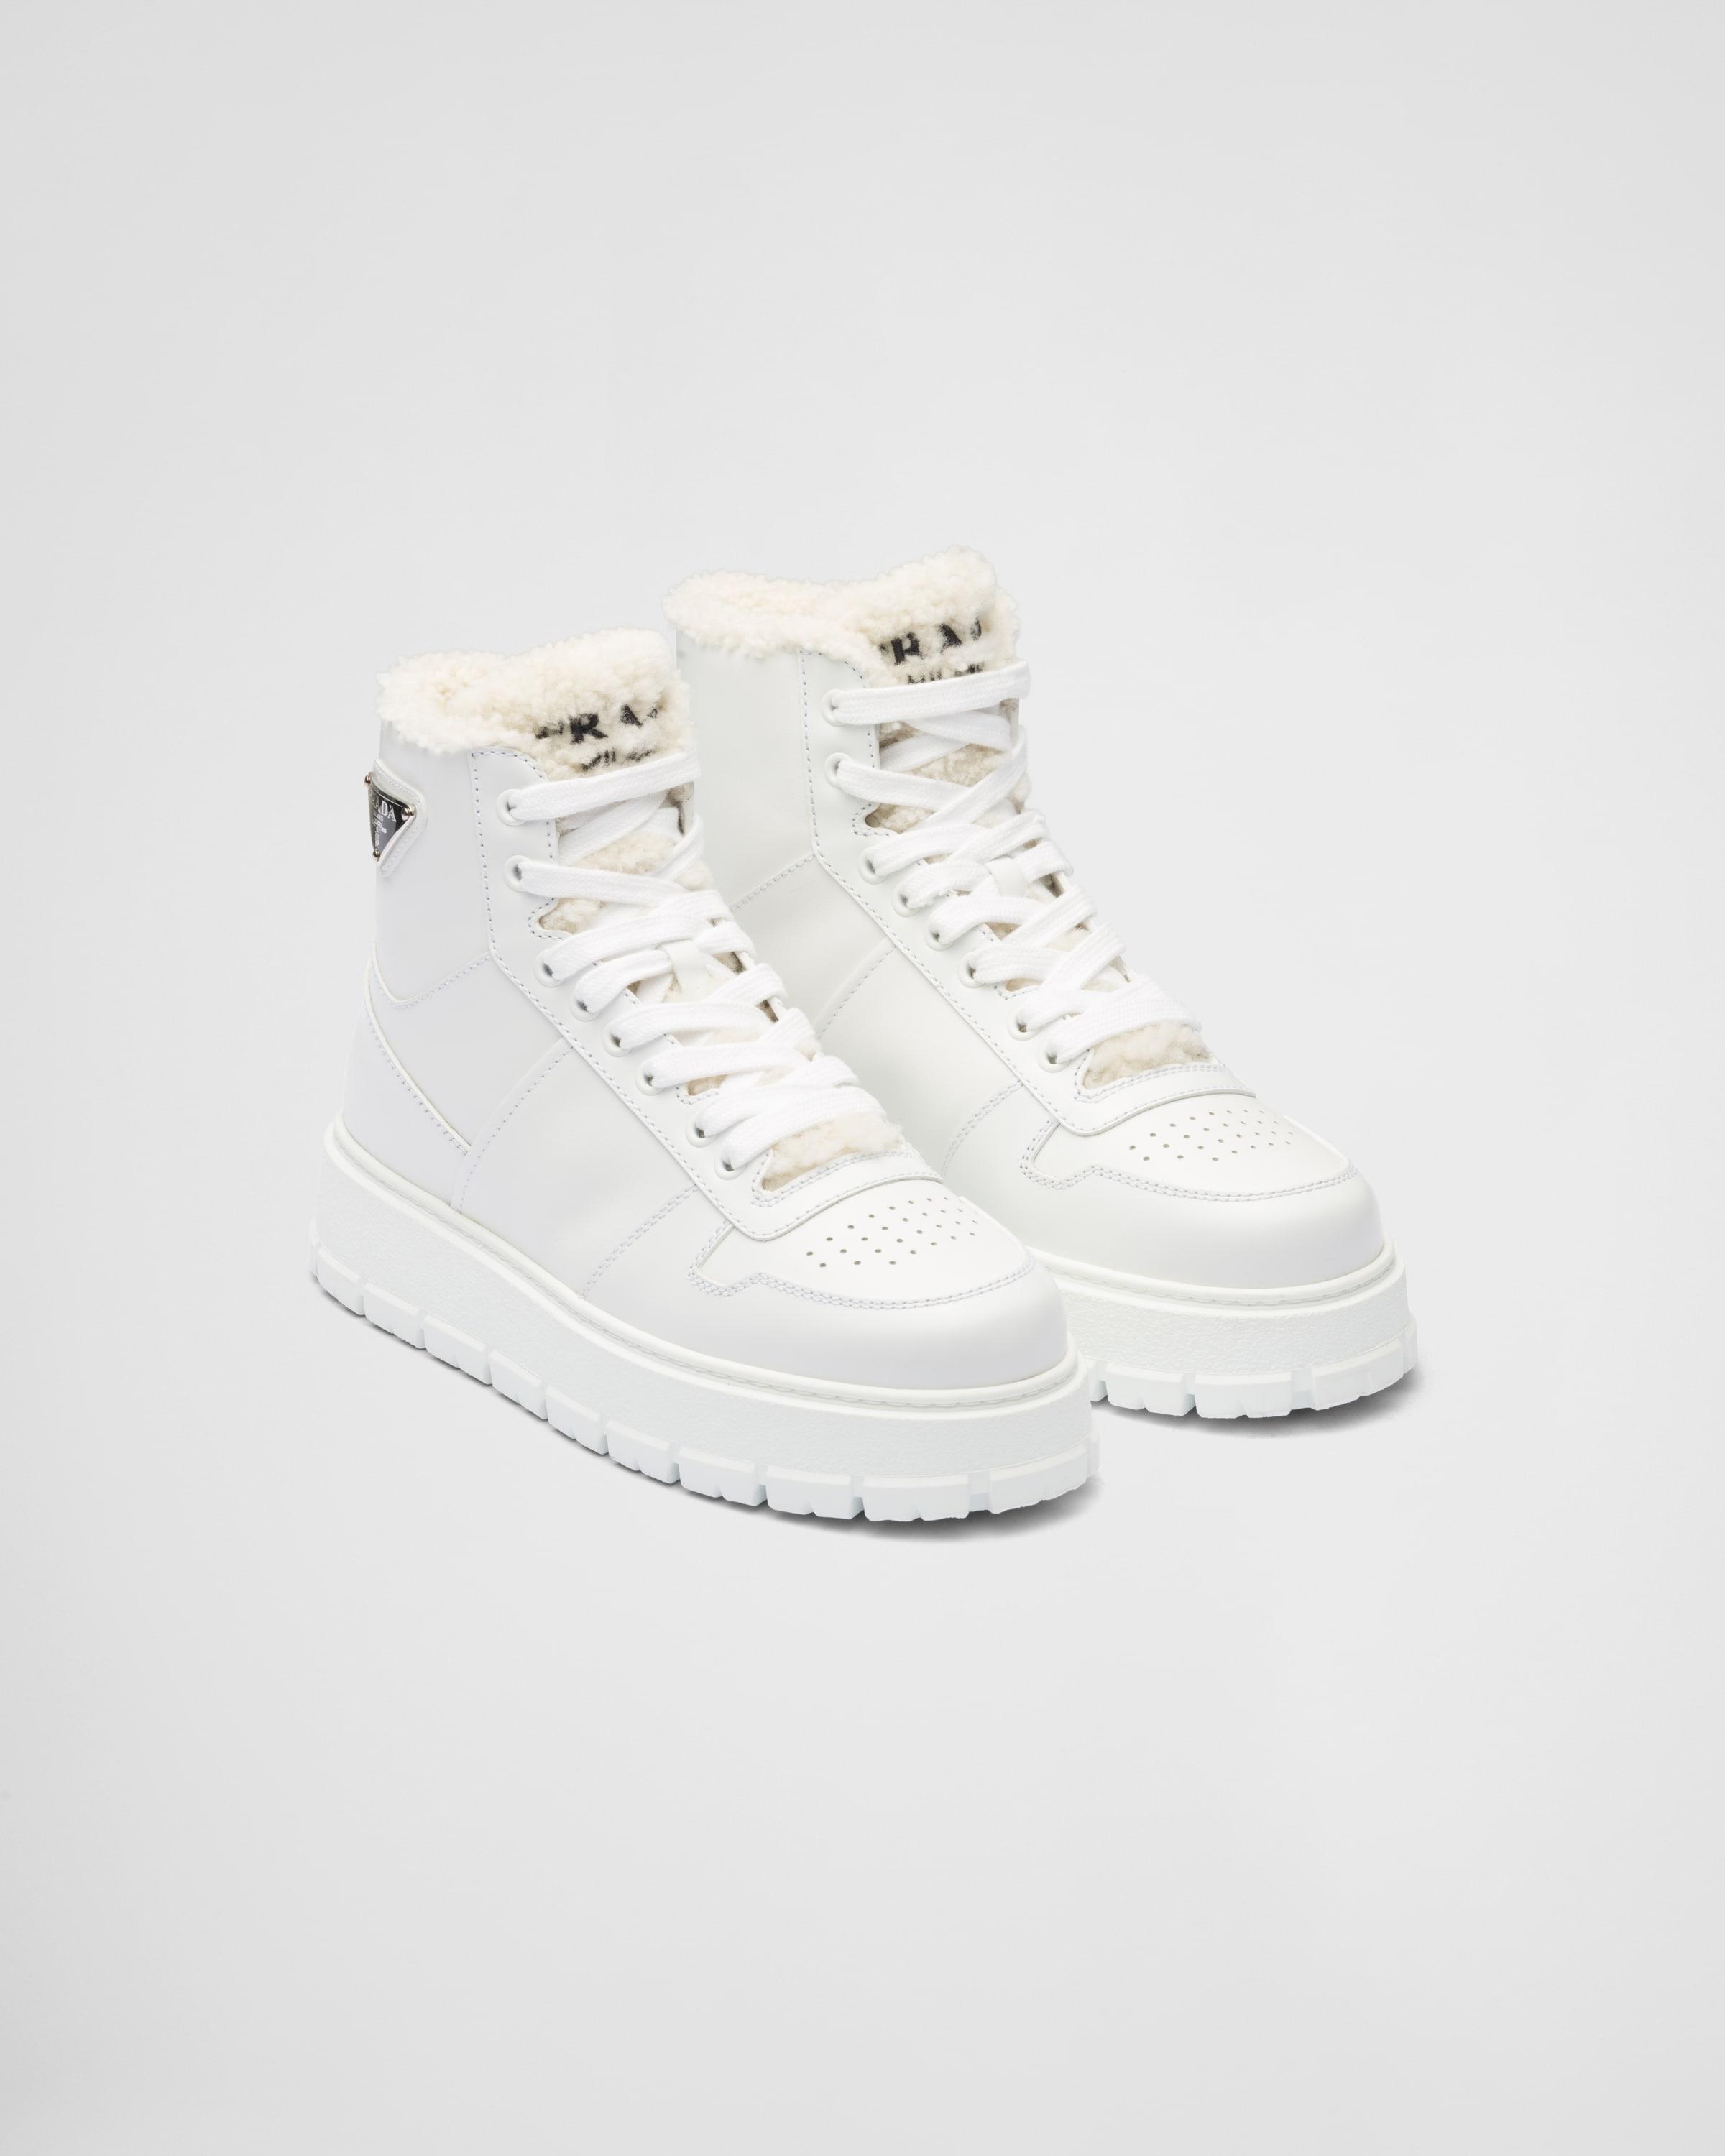 Prada Leather And Shearling High-top Sneakers in White